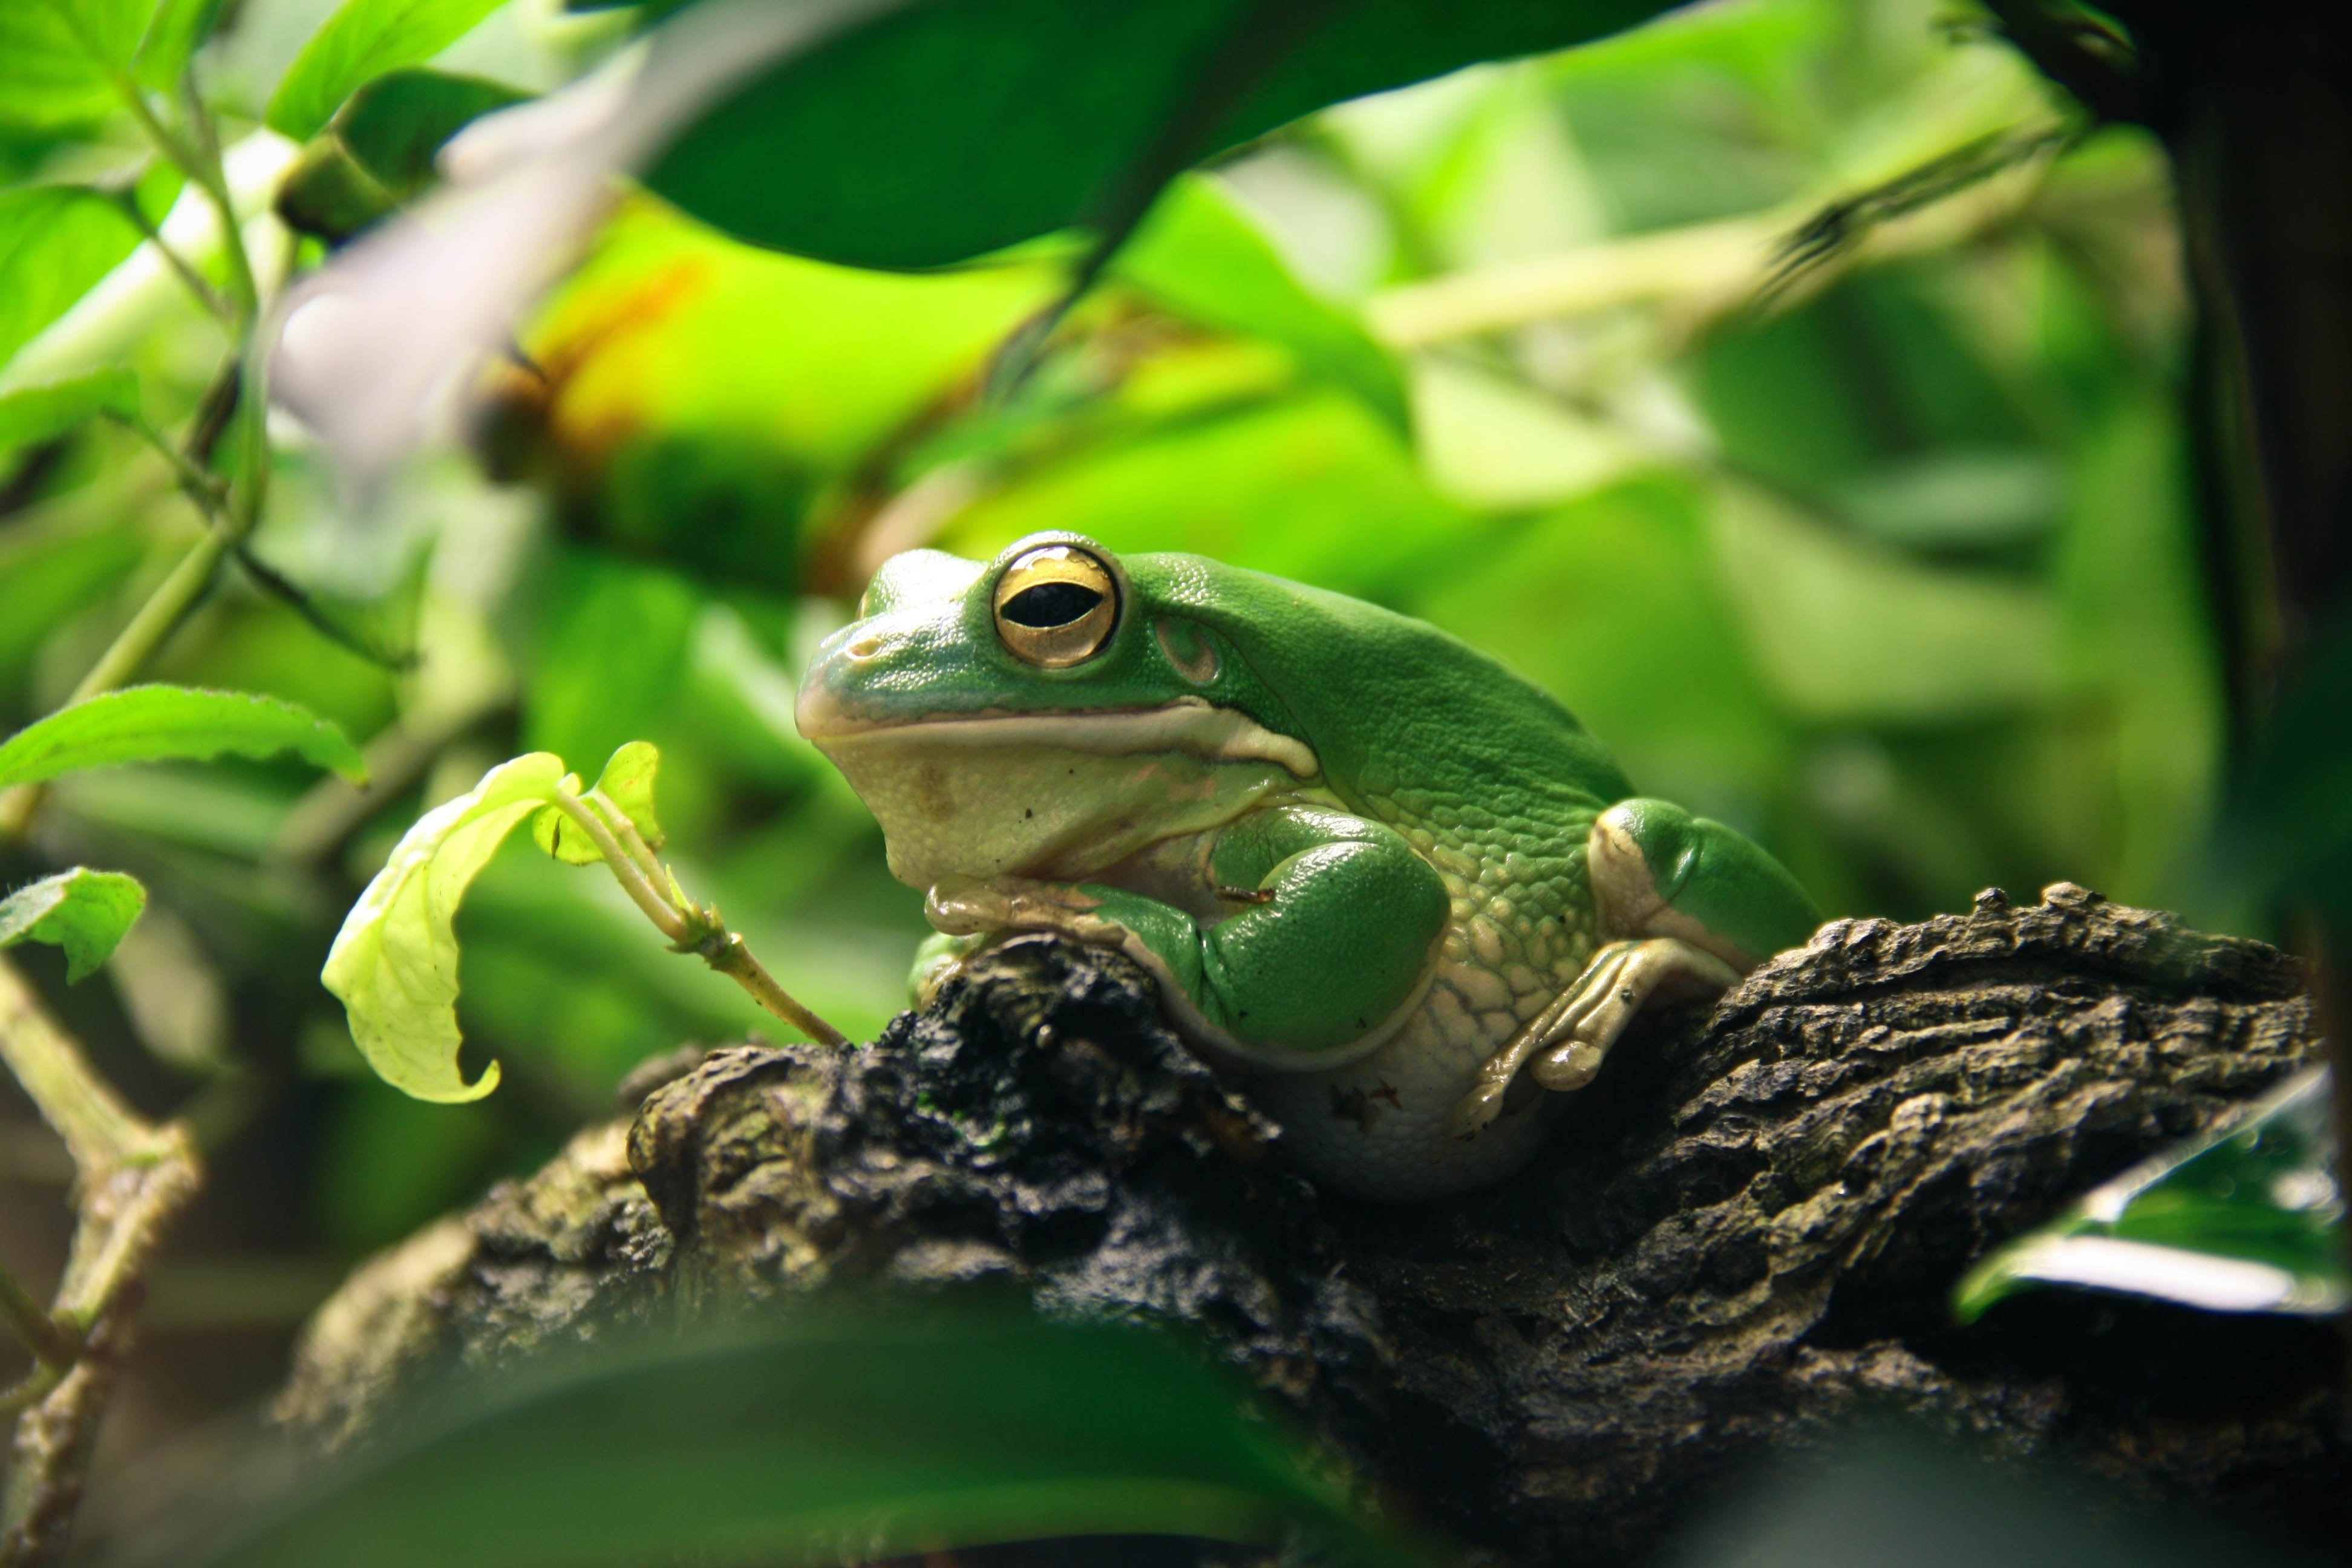 Pictured - A green and white frog on a tree branch | Source: Pexels 